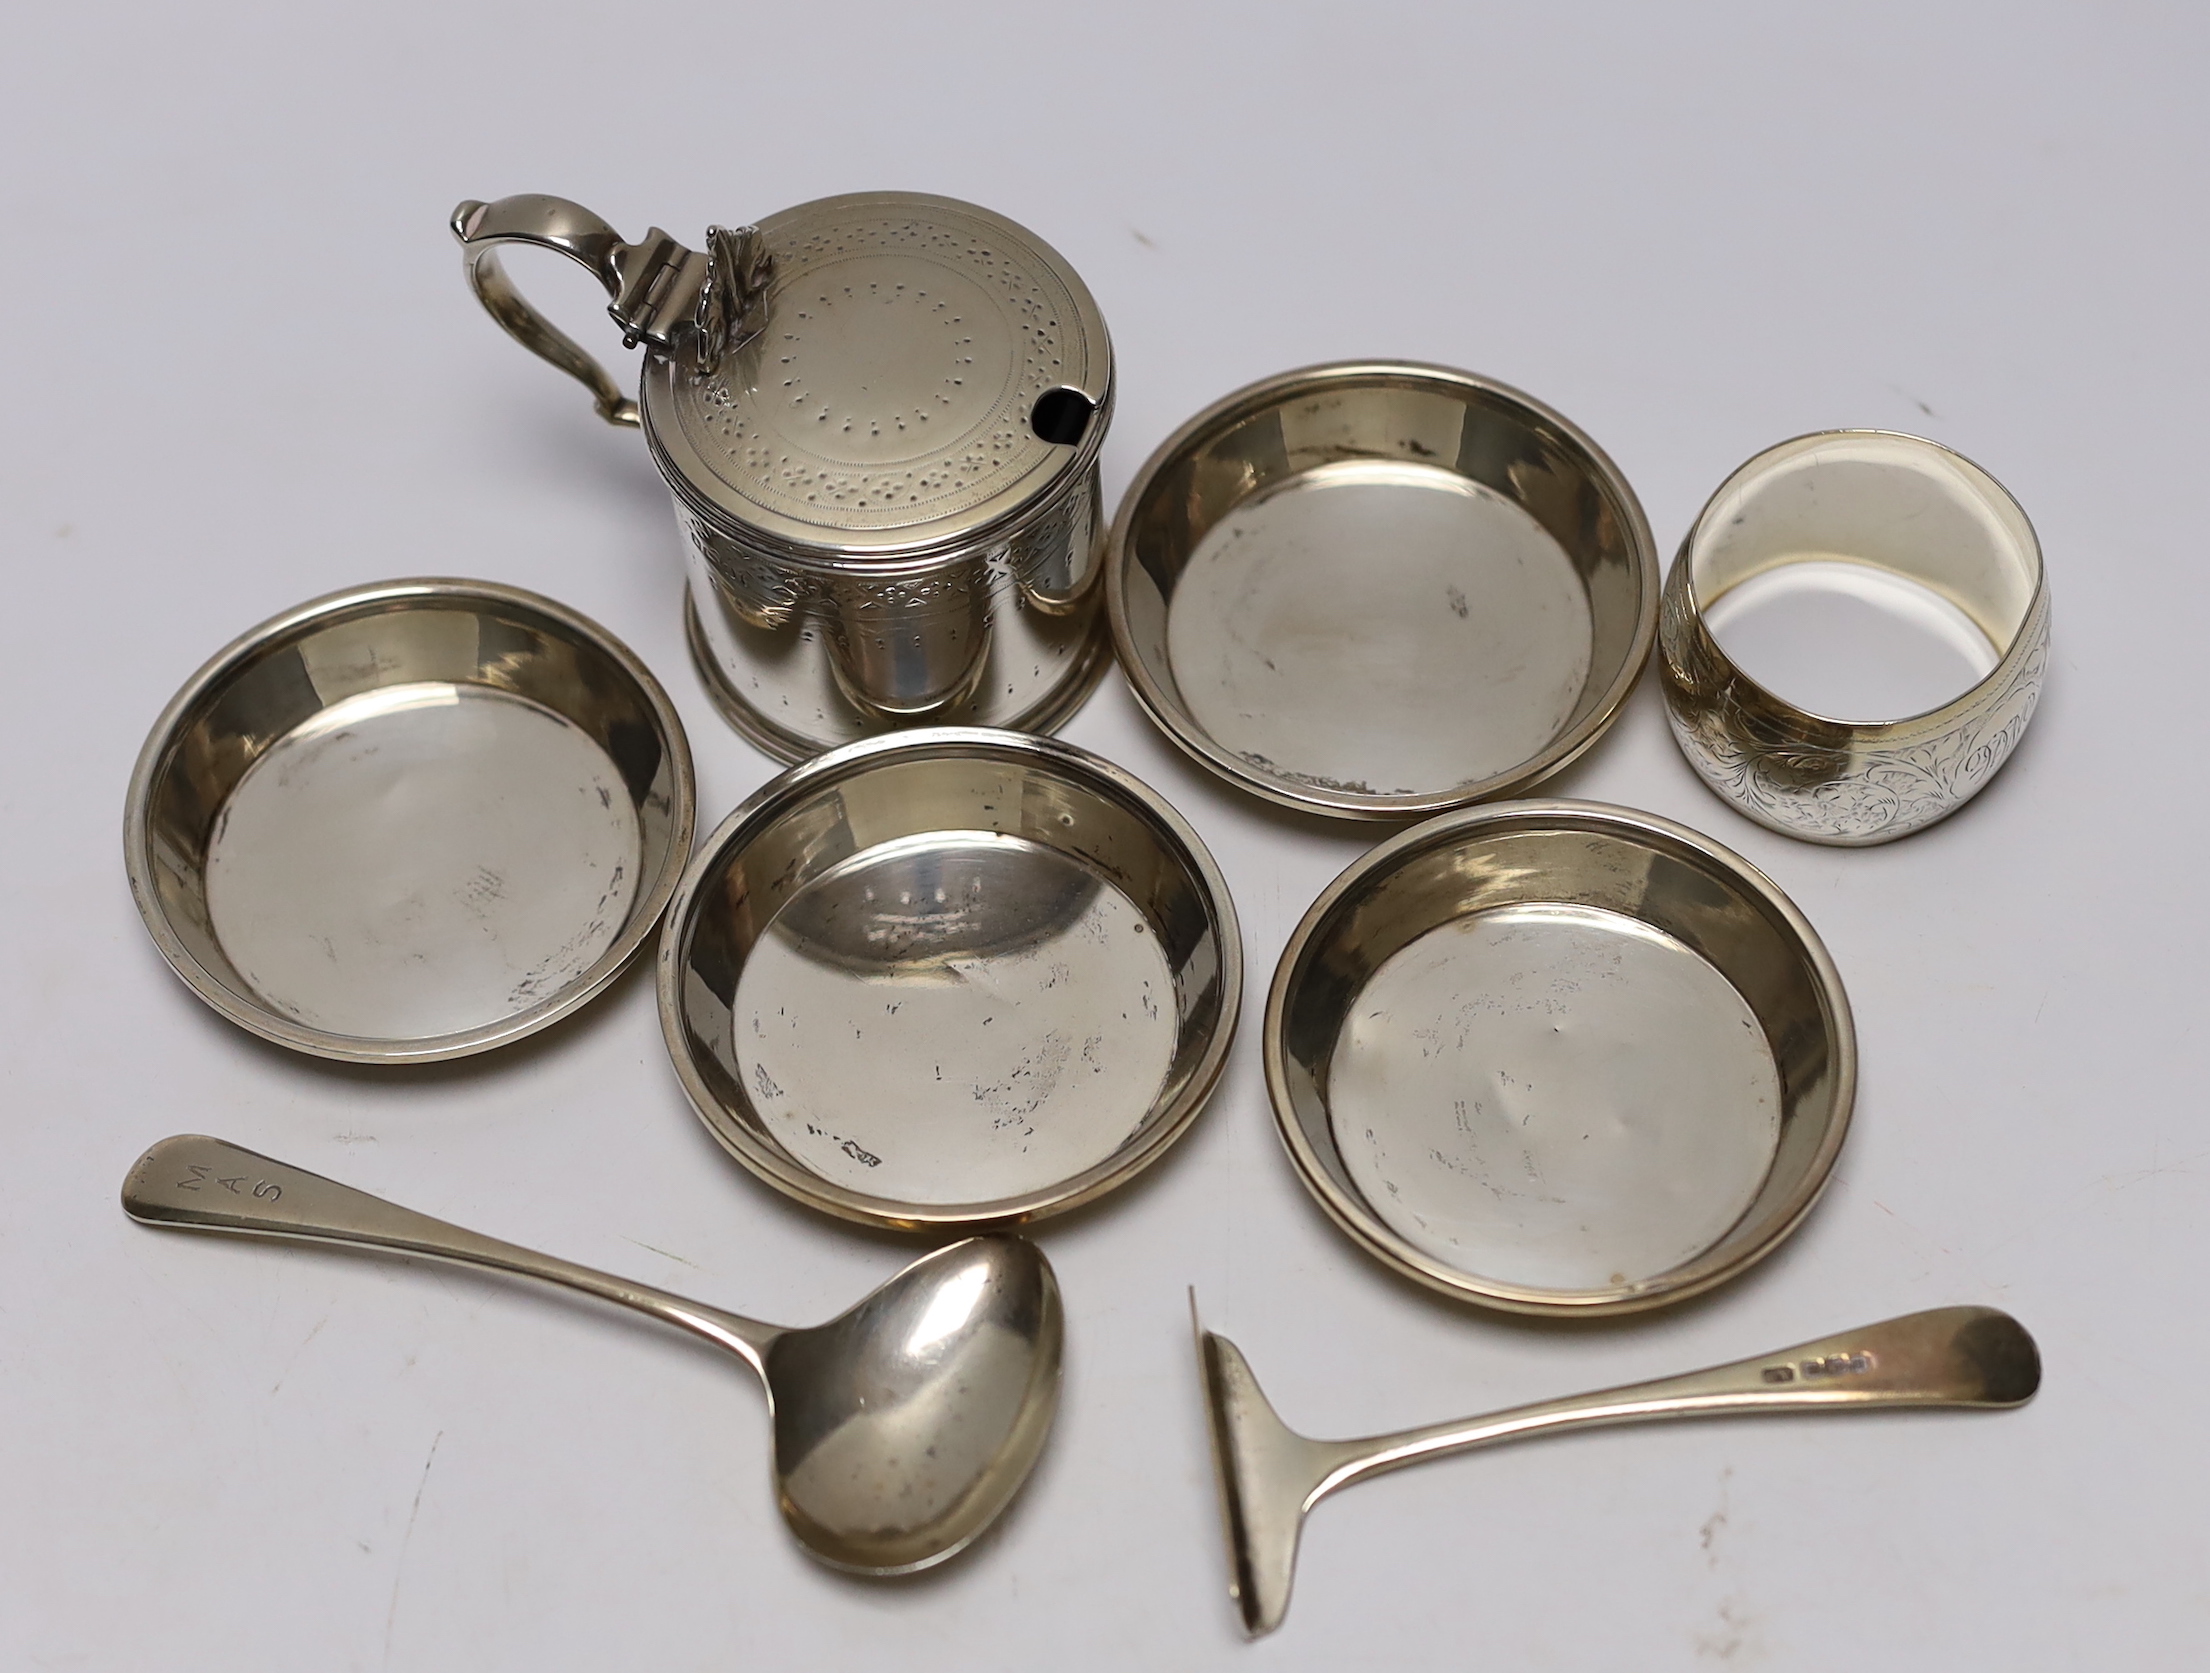 A Victorian silver mustard pot, Martin, Hall & Co, Sheffield, 1885, a set of four small silver dishes by Walker & Hall, a silver spoon & pusher and a silver napkin ring.